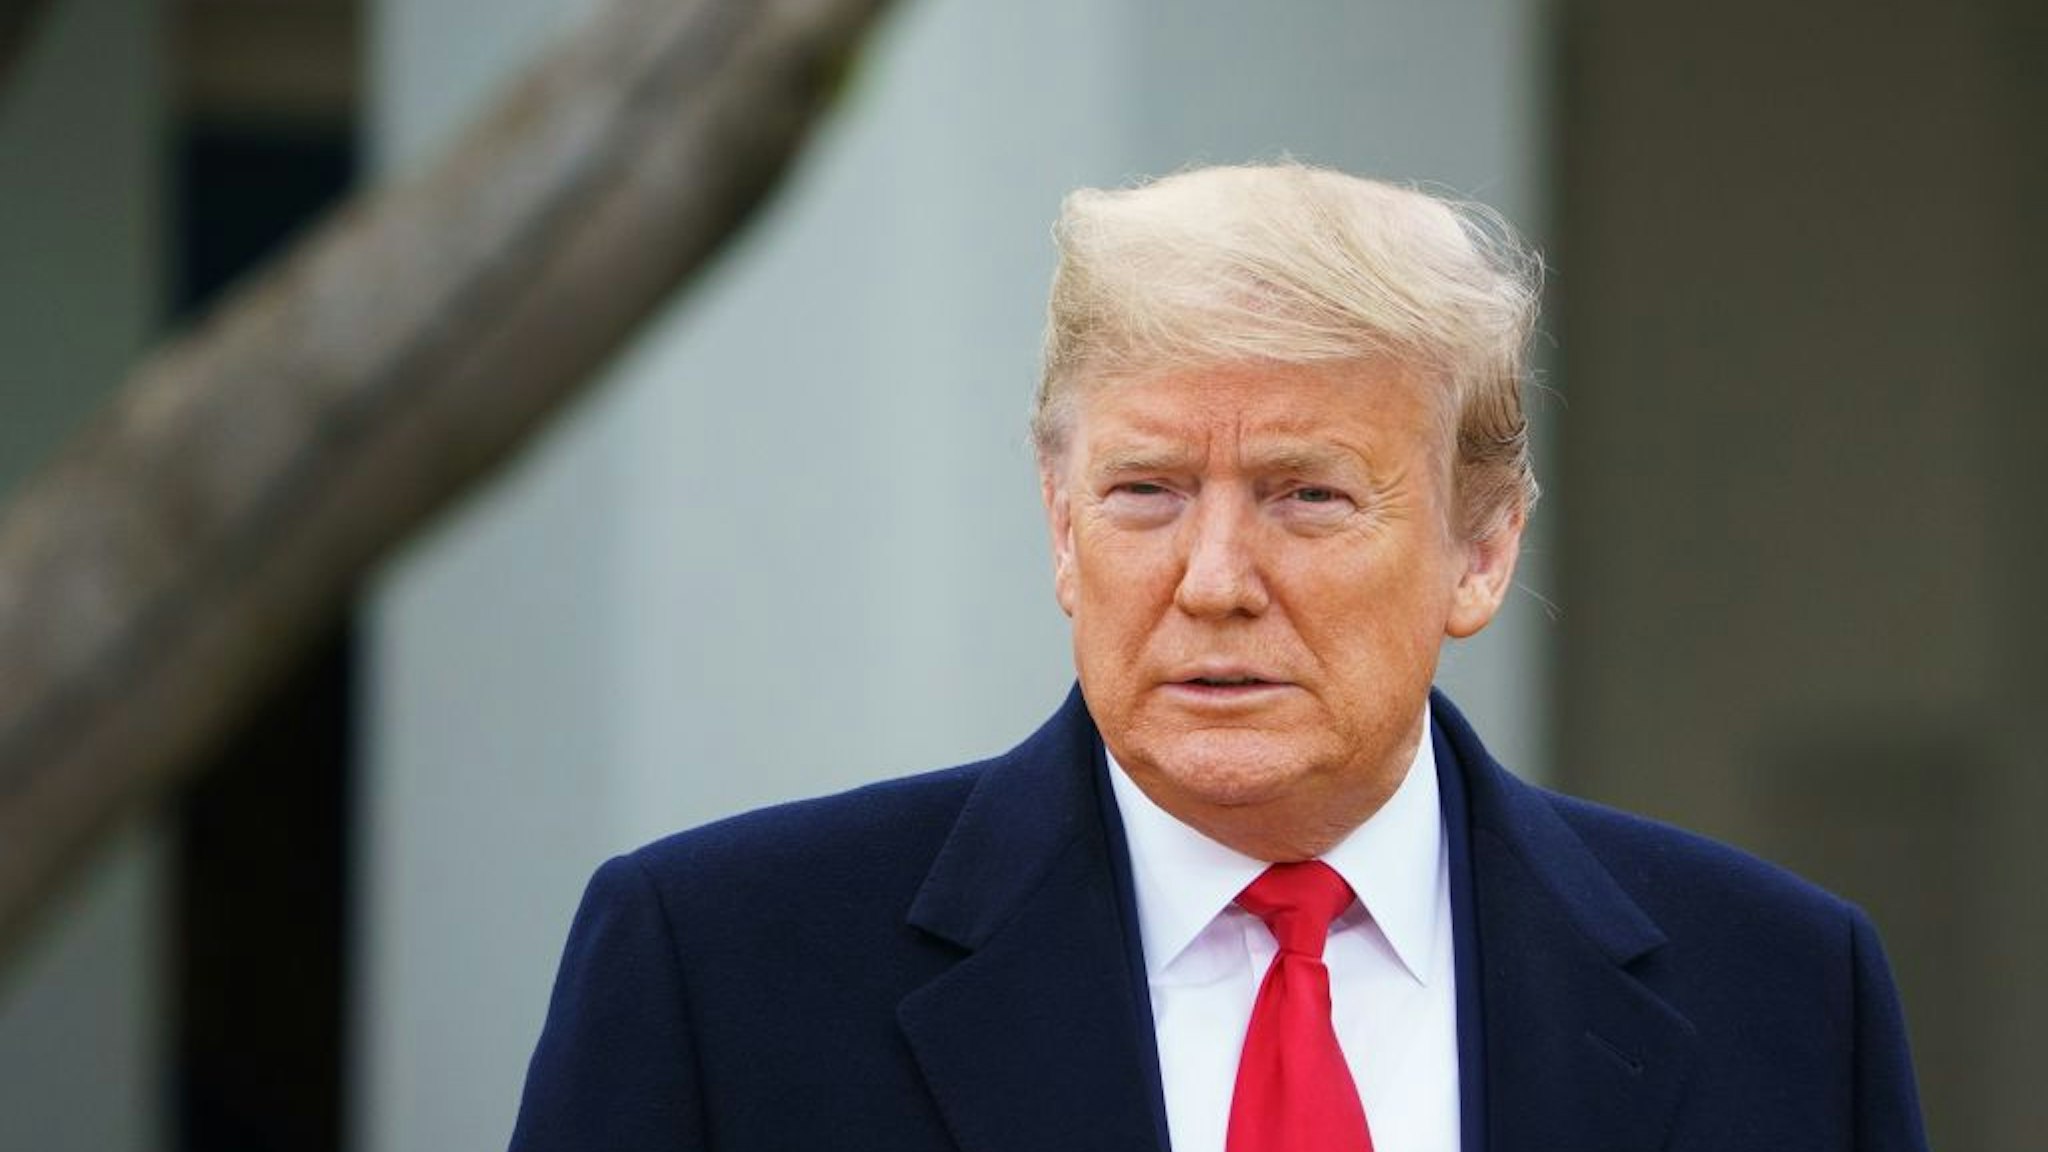 US President Donald Trump is seen before the start of a Fox News virtual town hall meeting from the Rose Garden of the White House in Washington, DC on March 24, 2020.